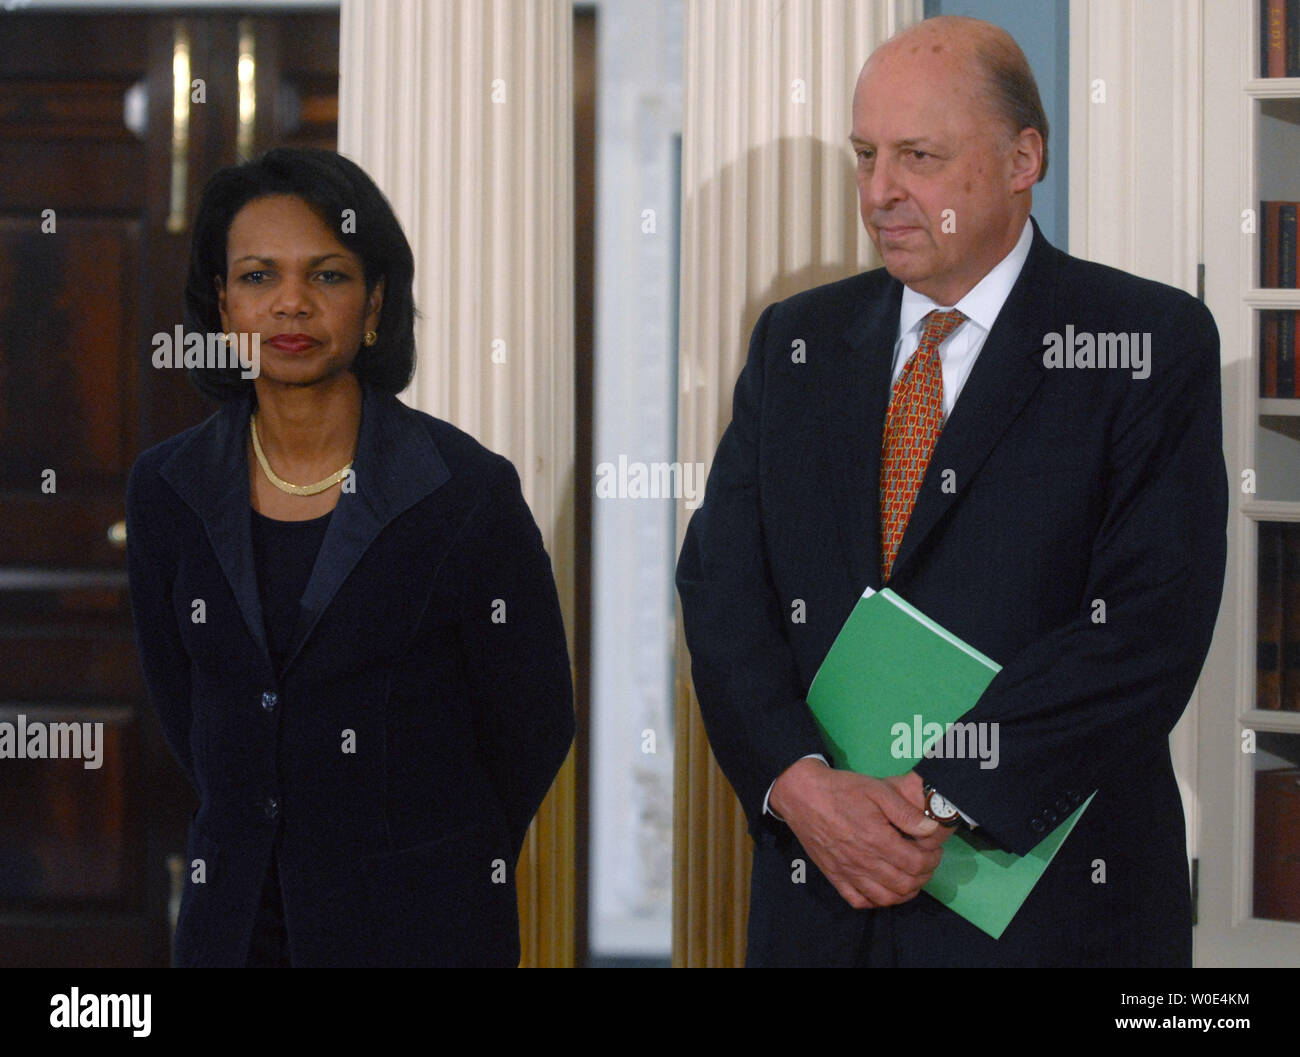 U.S. Secretary of State Condoleezza Rice (L) and Assistant Secretary of State John Negroponte attend a ceremony where there State Department received the Advisory Committee on Transformational Diplomacy's final report at the State Department in Washington on January 29, 2008. The advisory was formed to help transition the State Department's diplomatic practices into the 21st century.  (UPI Photo/Kevin Dietsch) Stock Photo